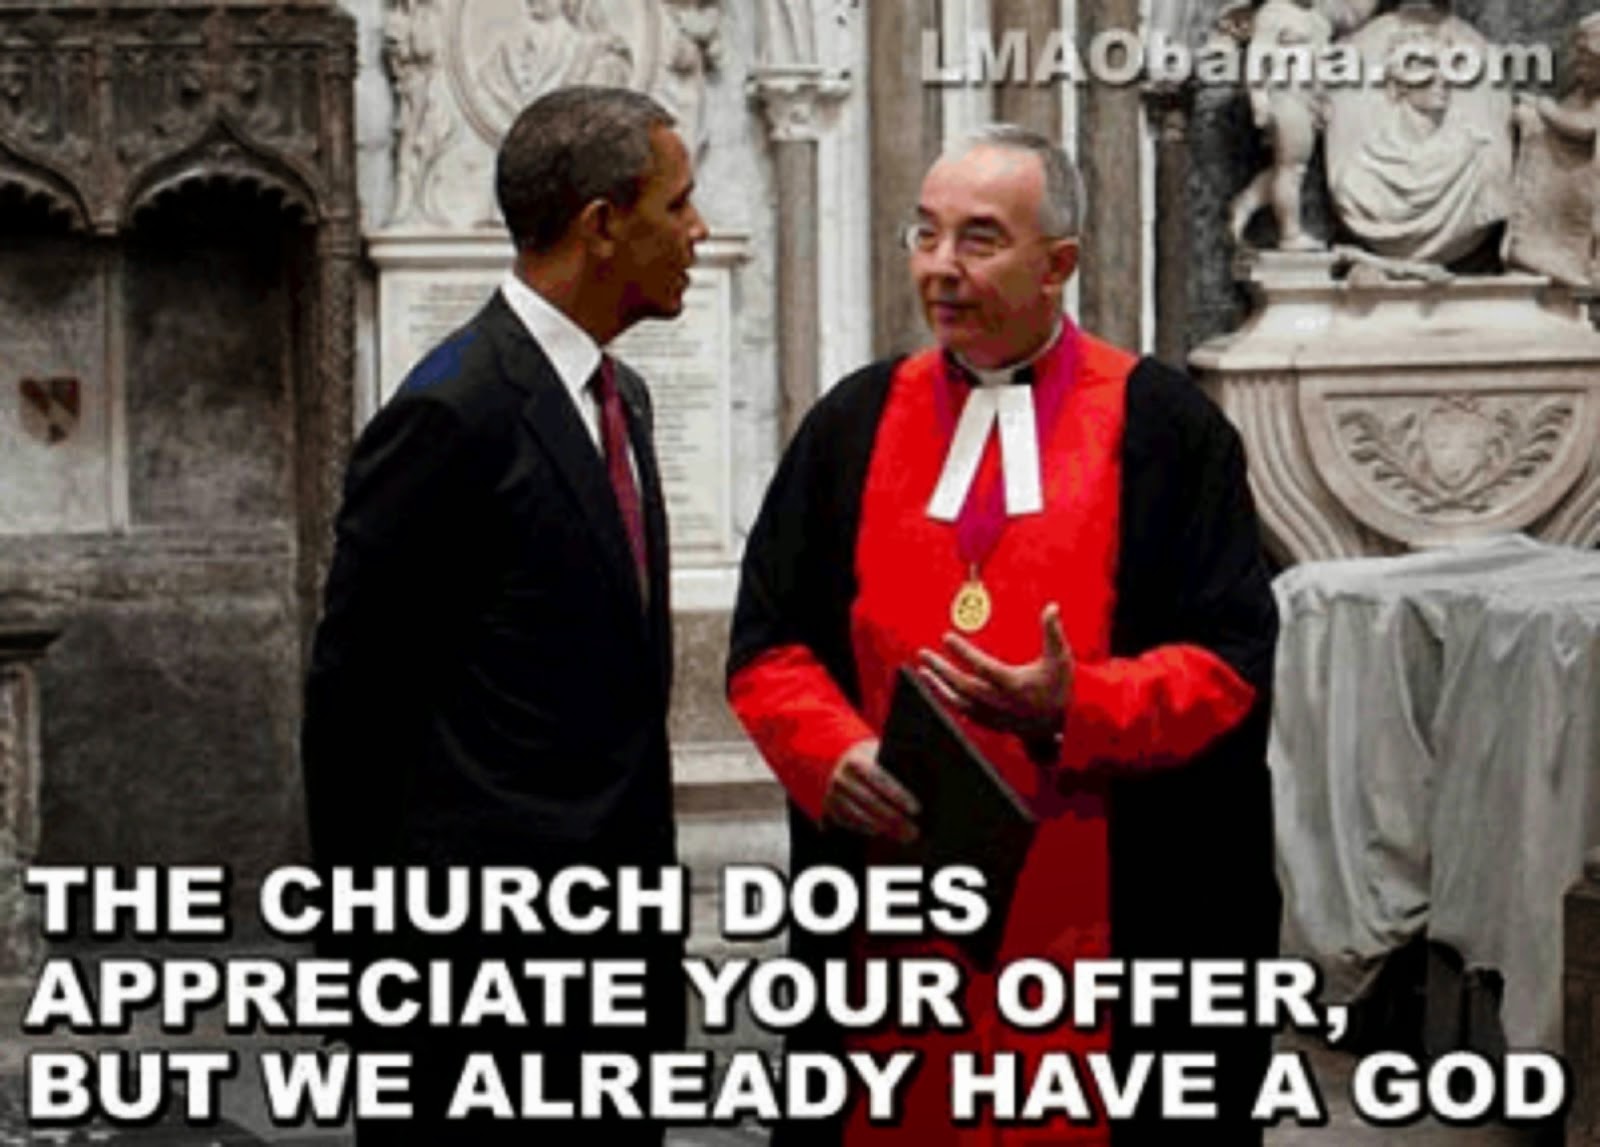 OBAMA APPLIES FOR A JOB AS "GOD" AT THE VATICAN